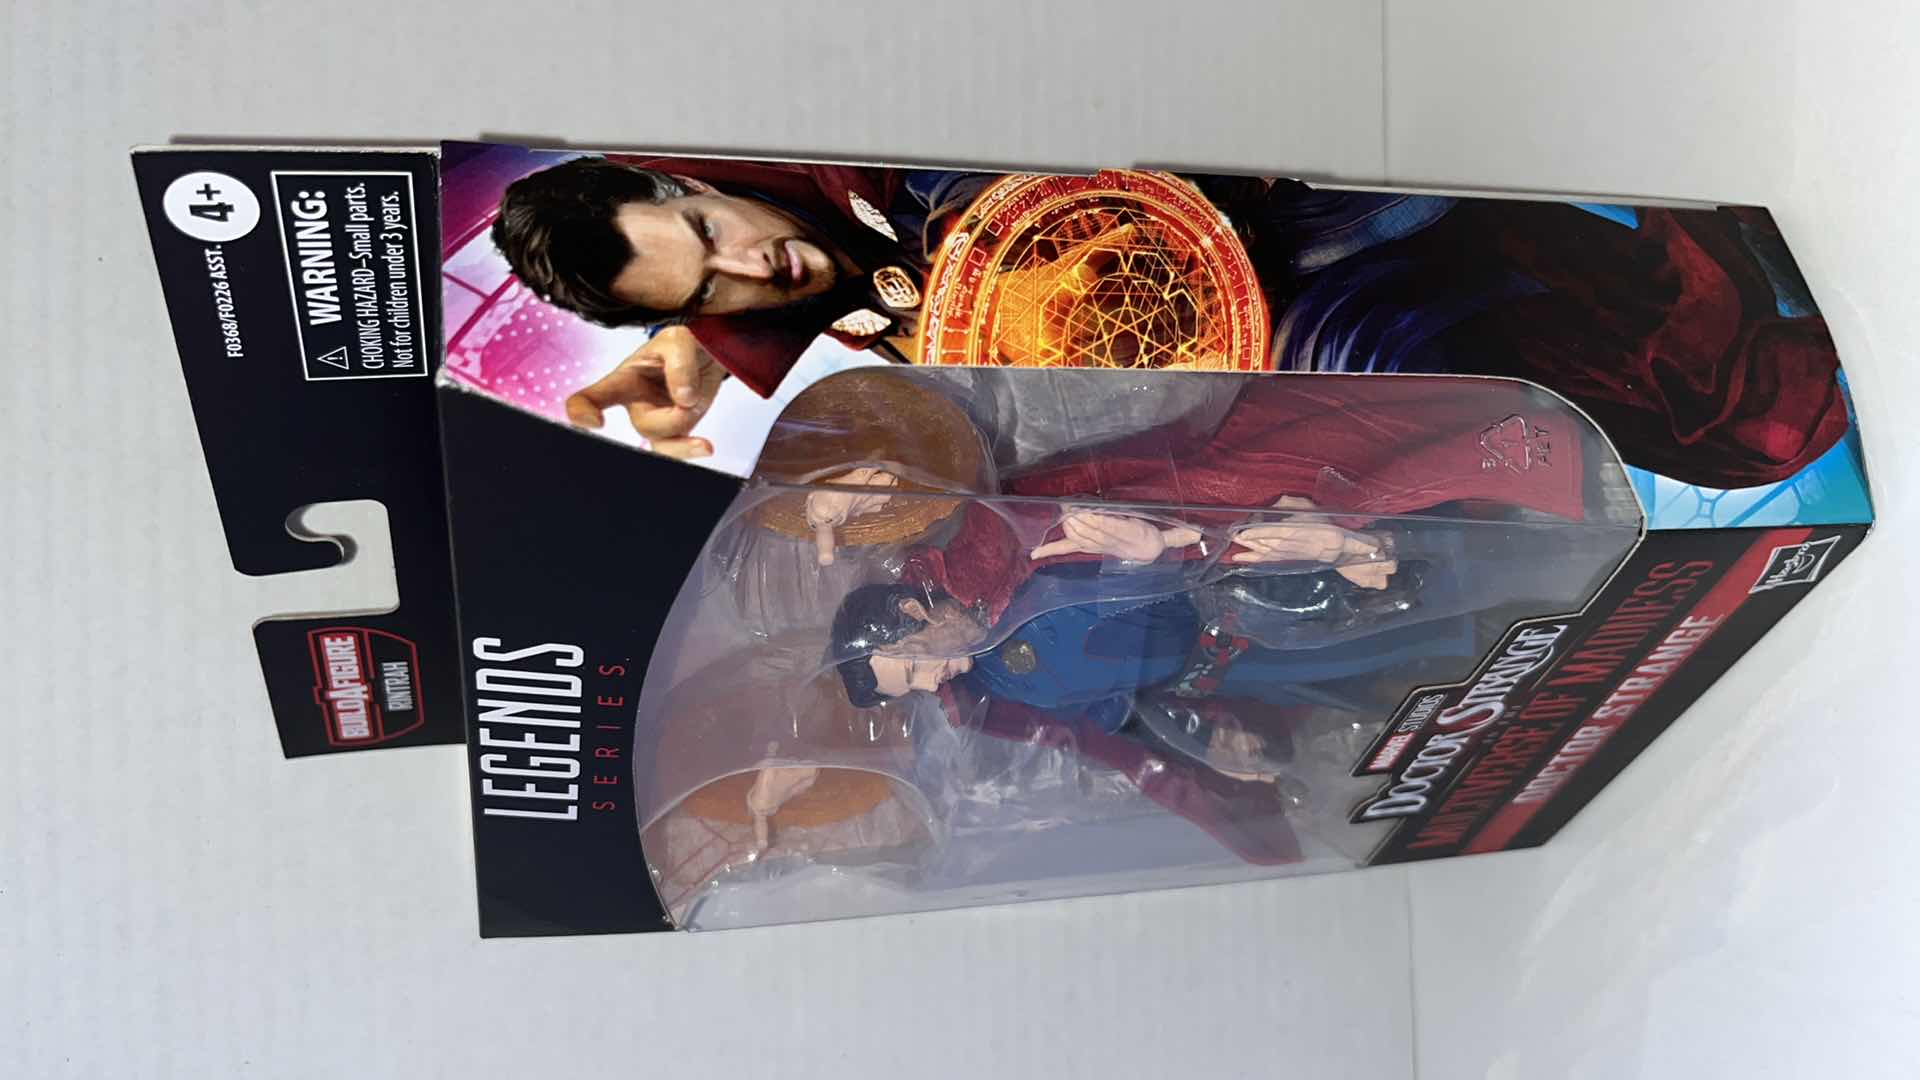 Photo 2 of NEW HASBRO MARVEL STUDIOS LEGENDS SERIES ACTION FIGURE & ACCESSORIES, DOCTOR STRANGE IN THE MULTIVERSE OF MADNESS “DOCTOR STRANGE” $26.00 (1)